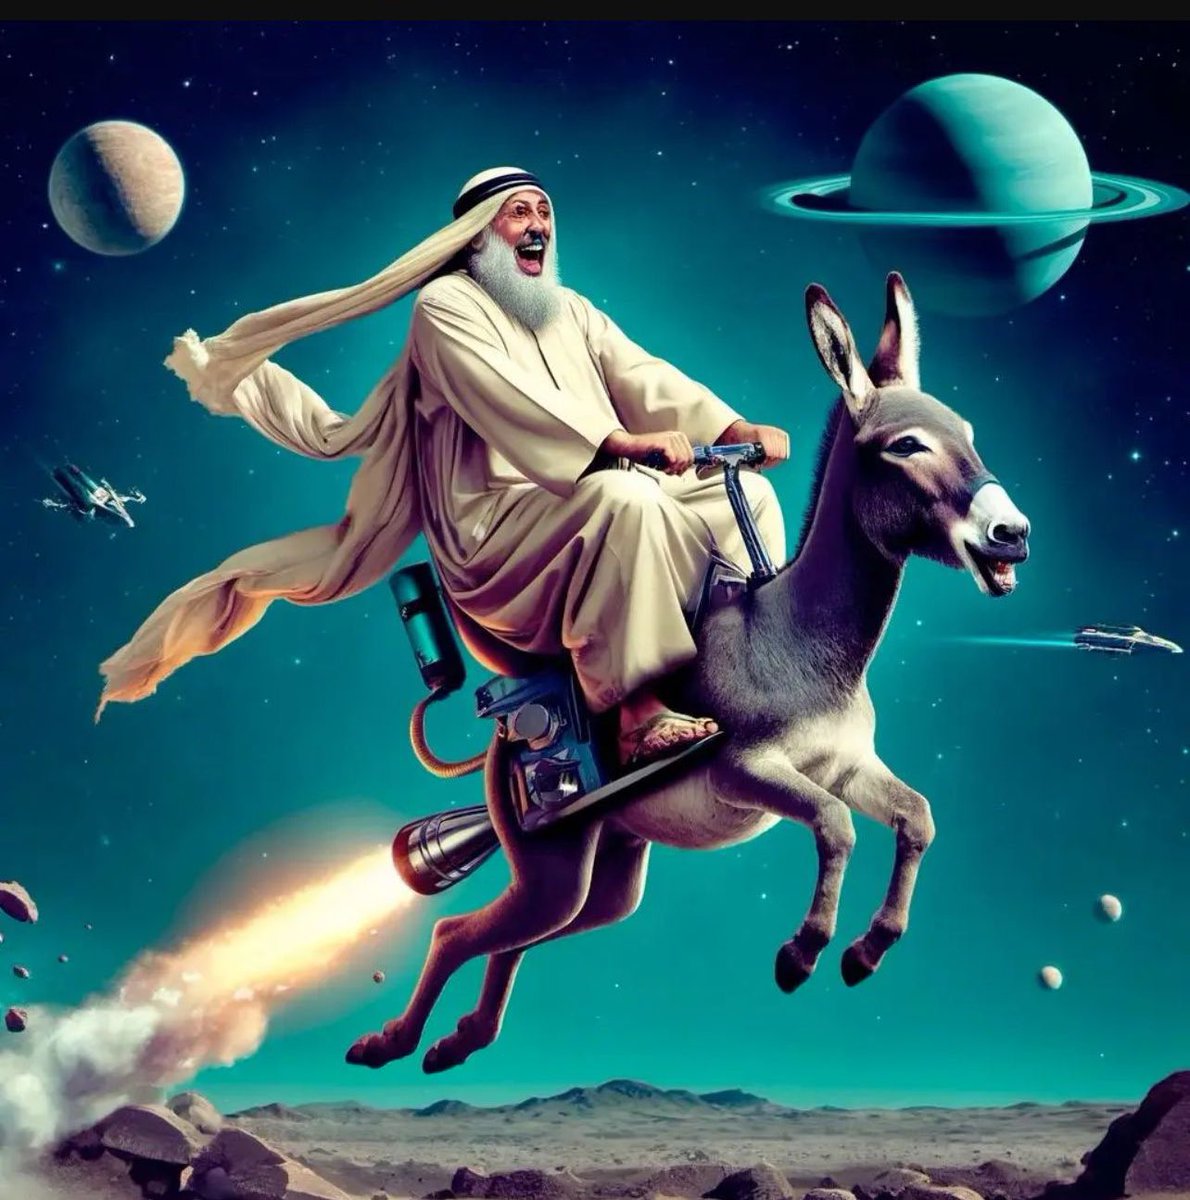 Did you know? The first person to fly to the moon was Muhammad, the Prophet of Islam. He flew on the back of a donkey and split the moon with his sword.
This is what will be taught in Western universities soon after the West is Islamized.